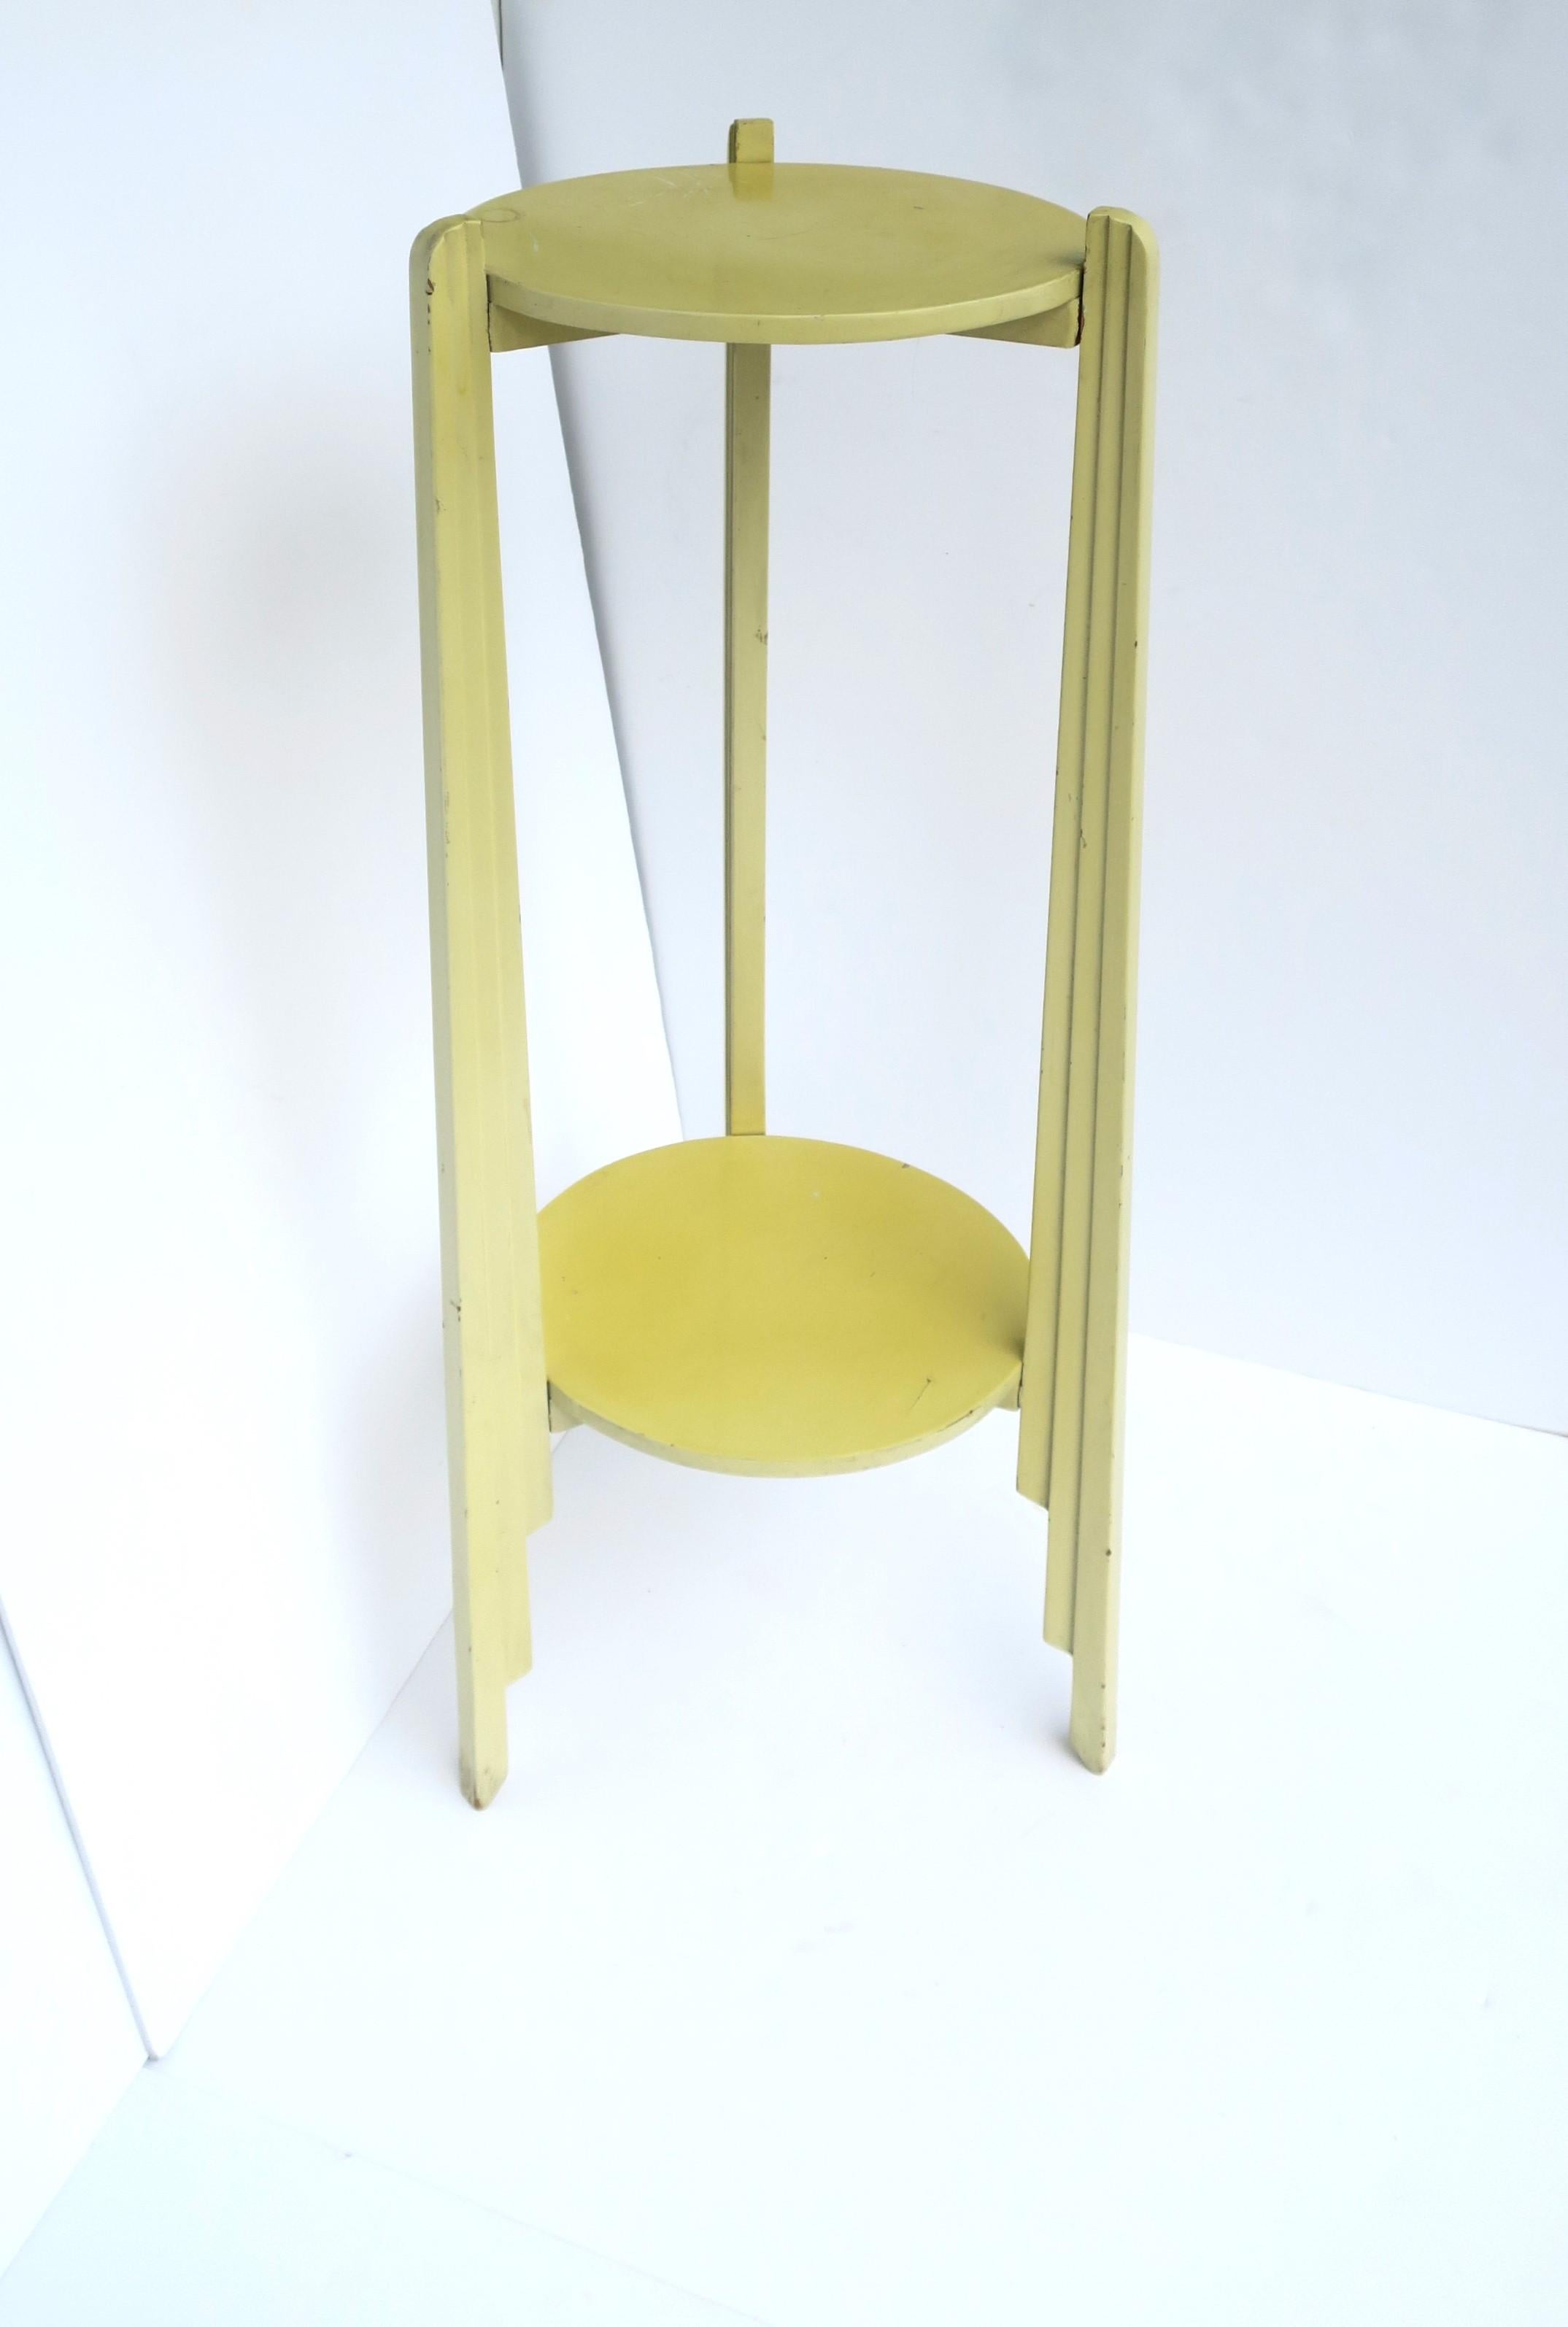 20th Century Yellow Art Deco Column Pillar Pedestal Stand with Lower Shelf, 1 of 2 Available For Sale